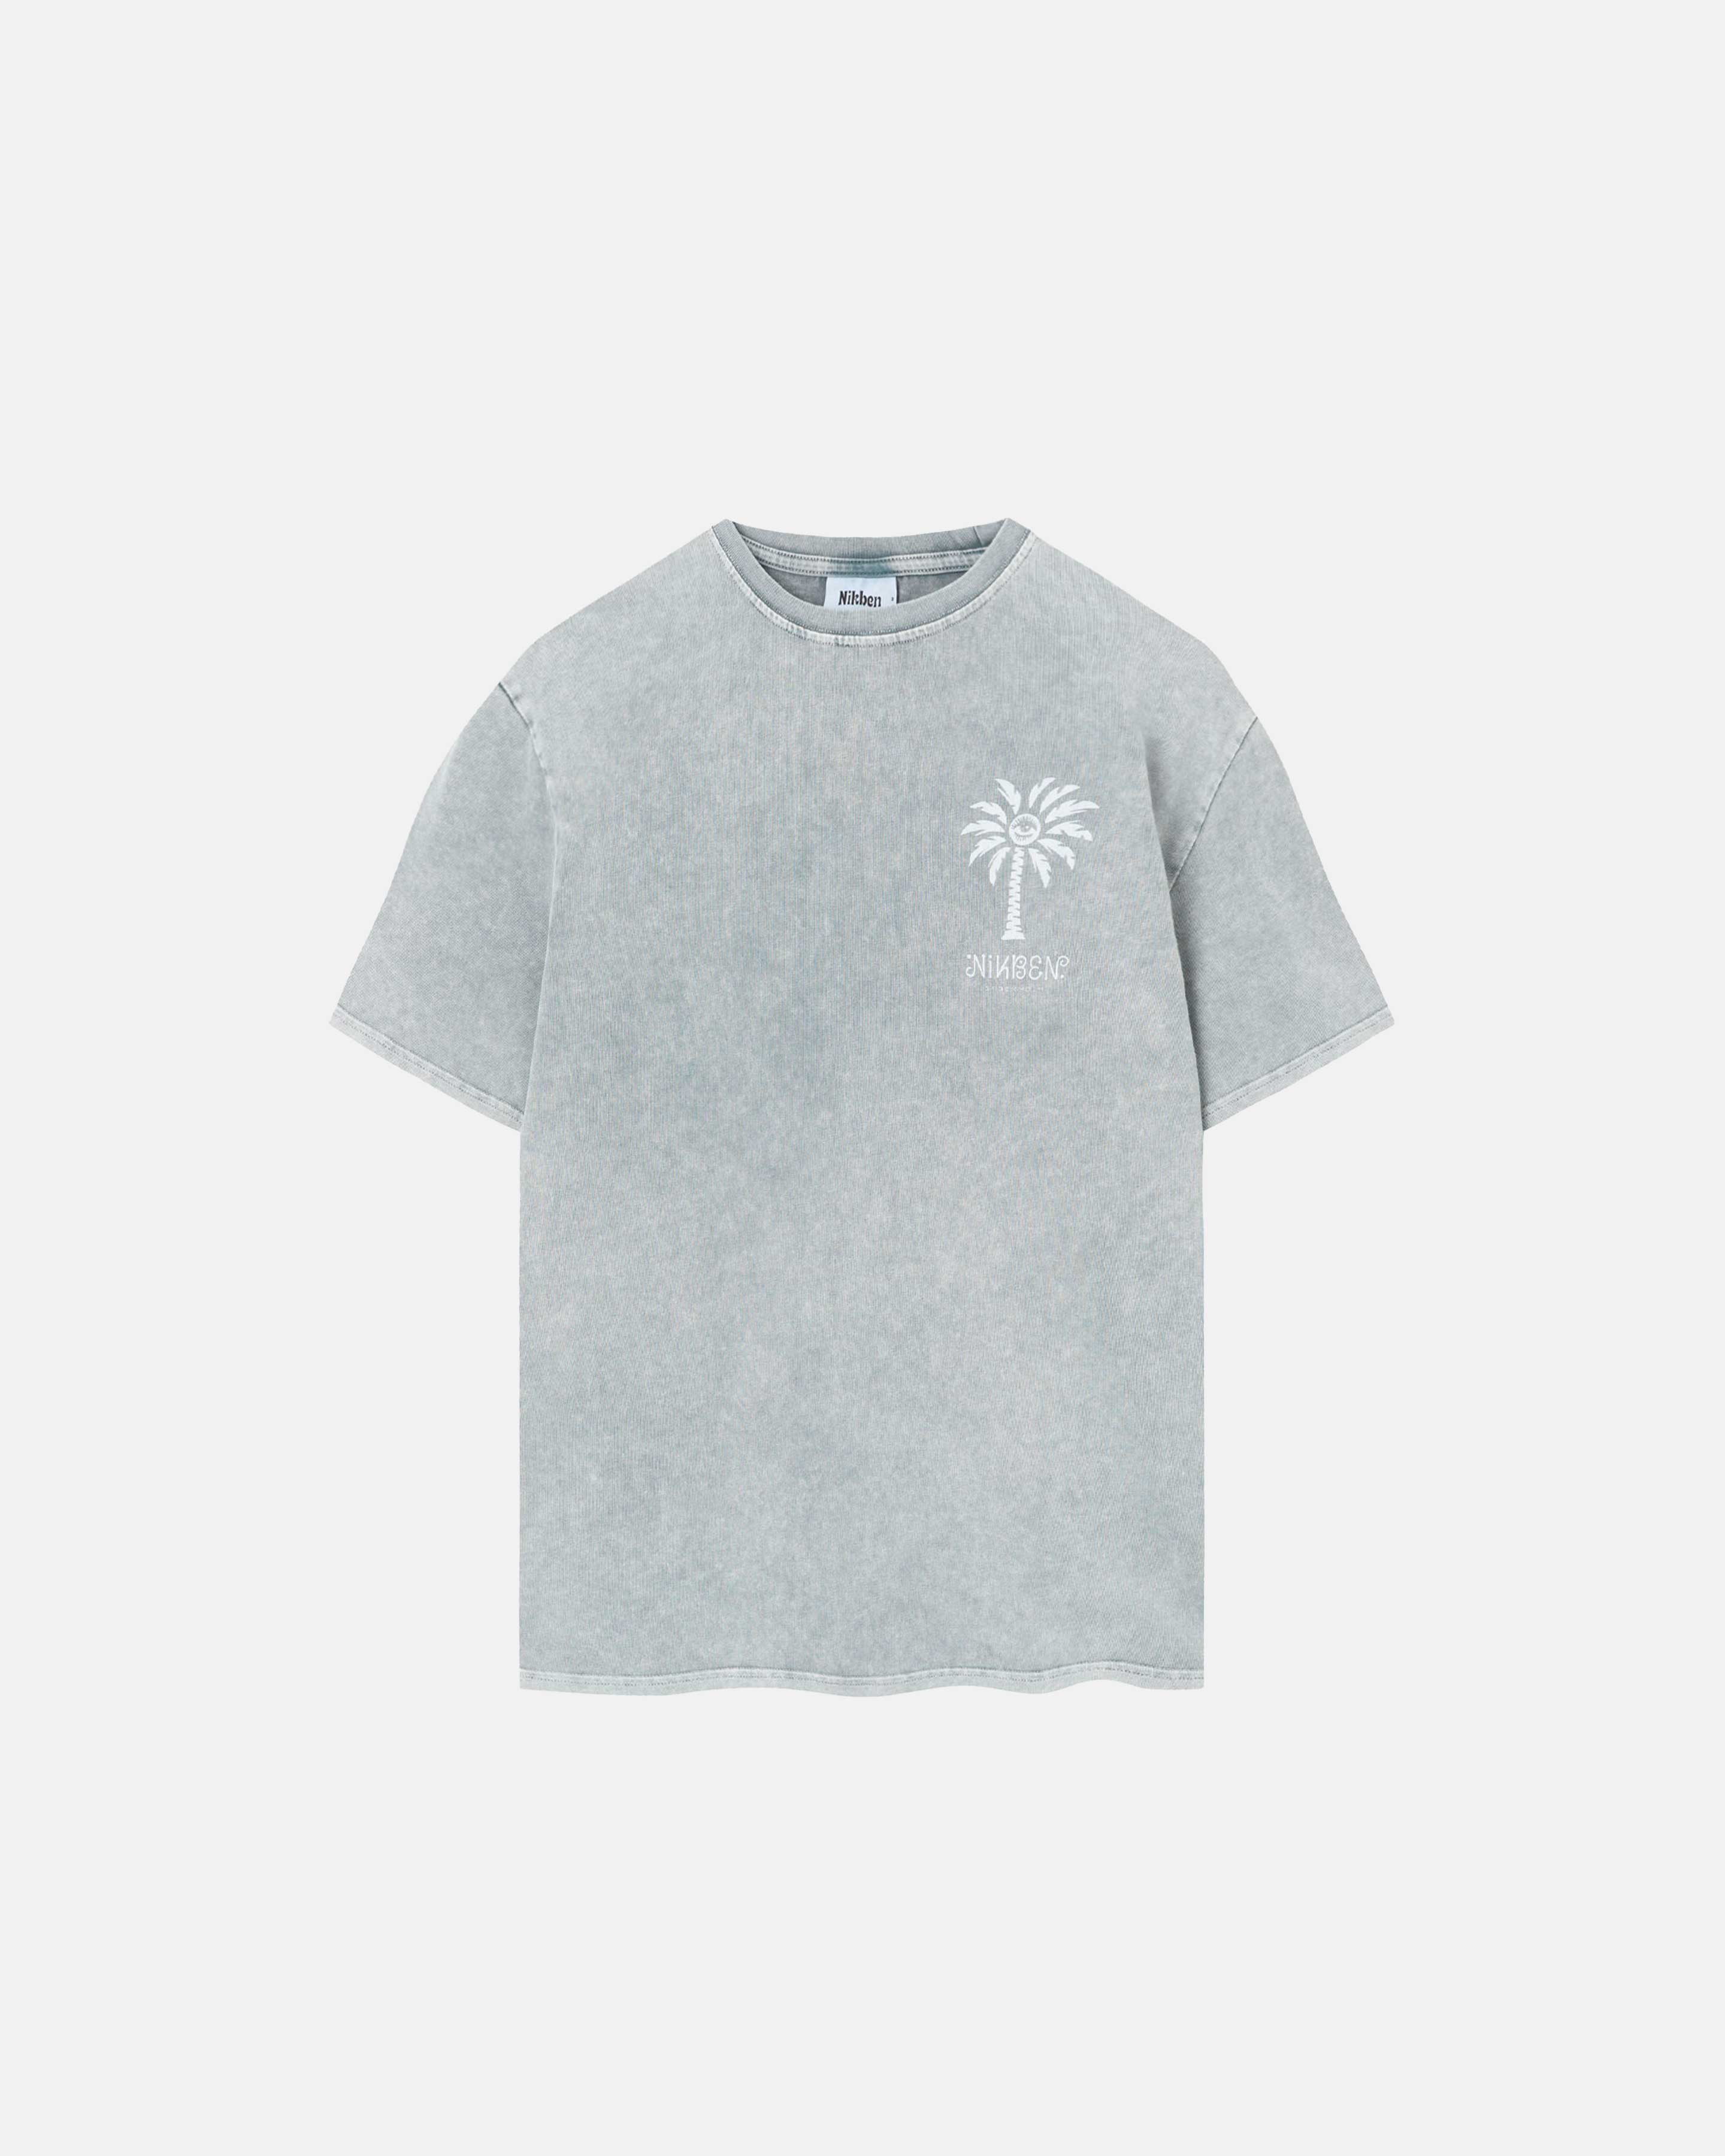 Grey t-shirt with a white palm print on the chest.